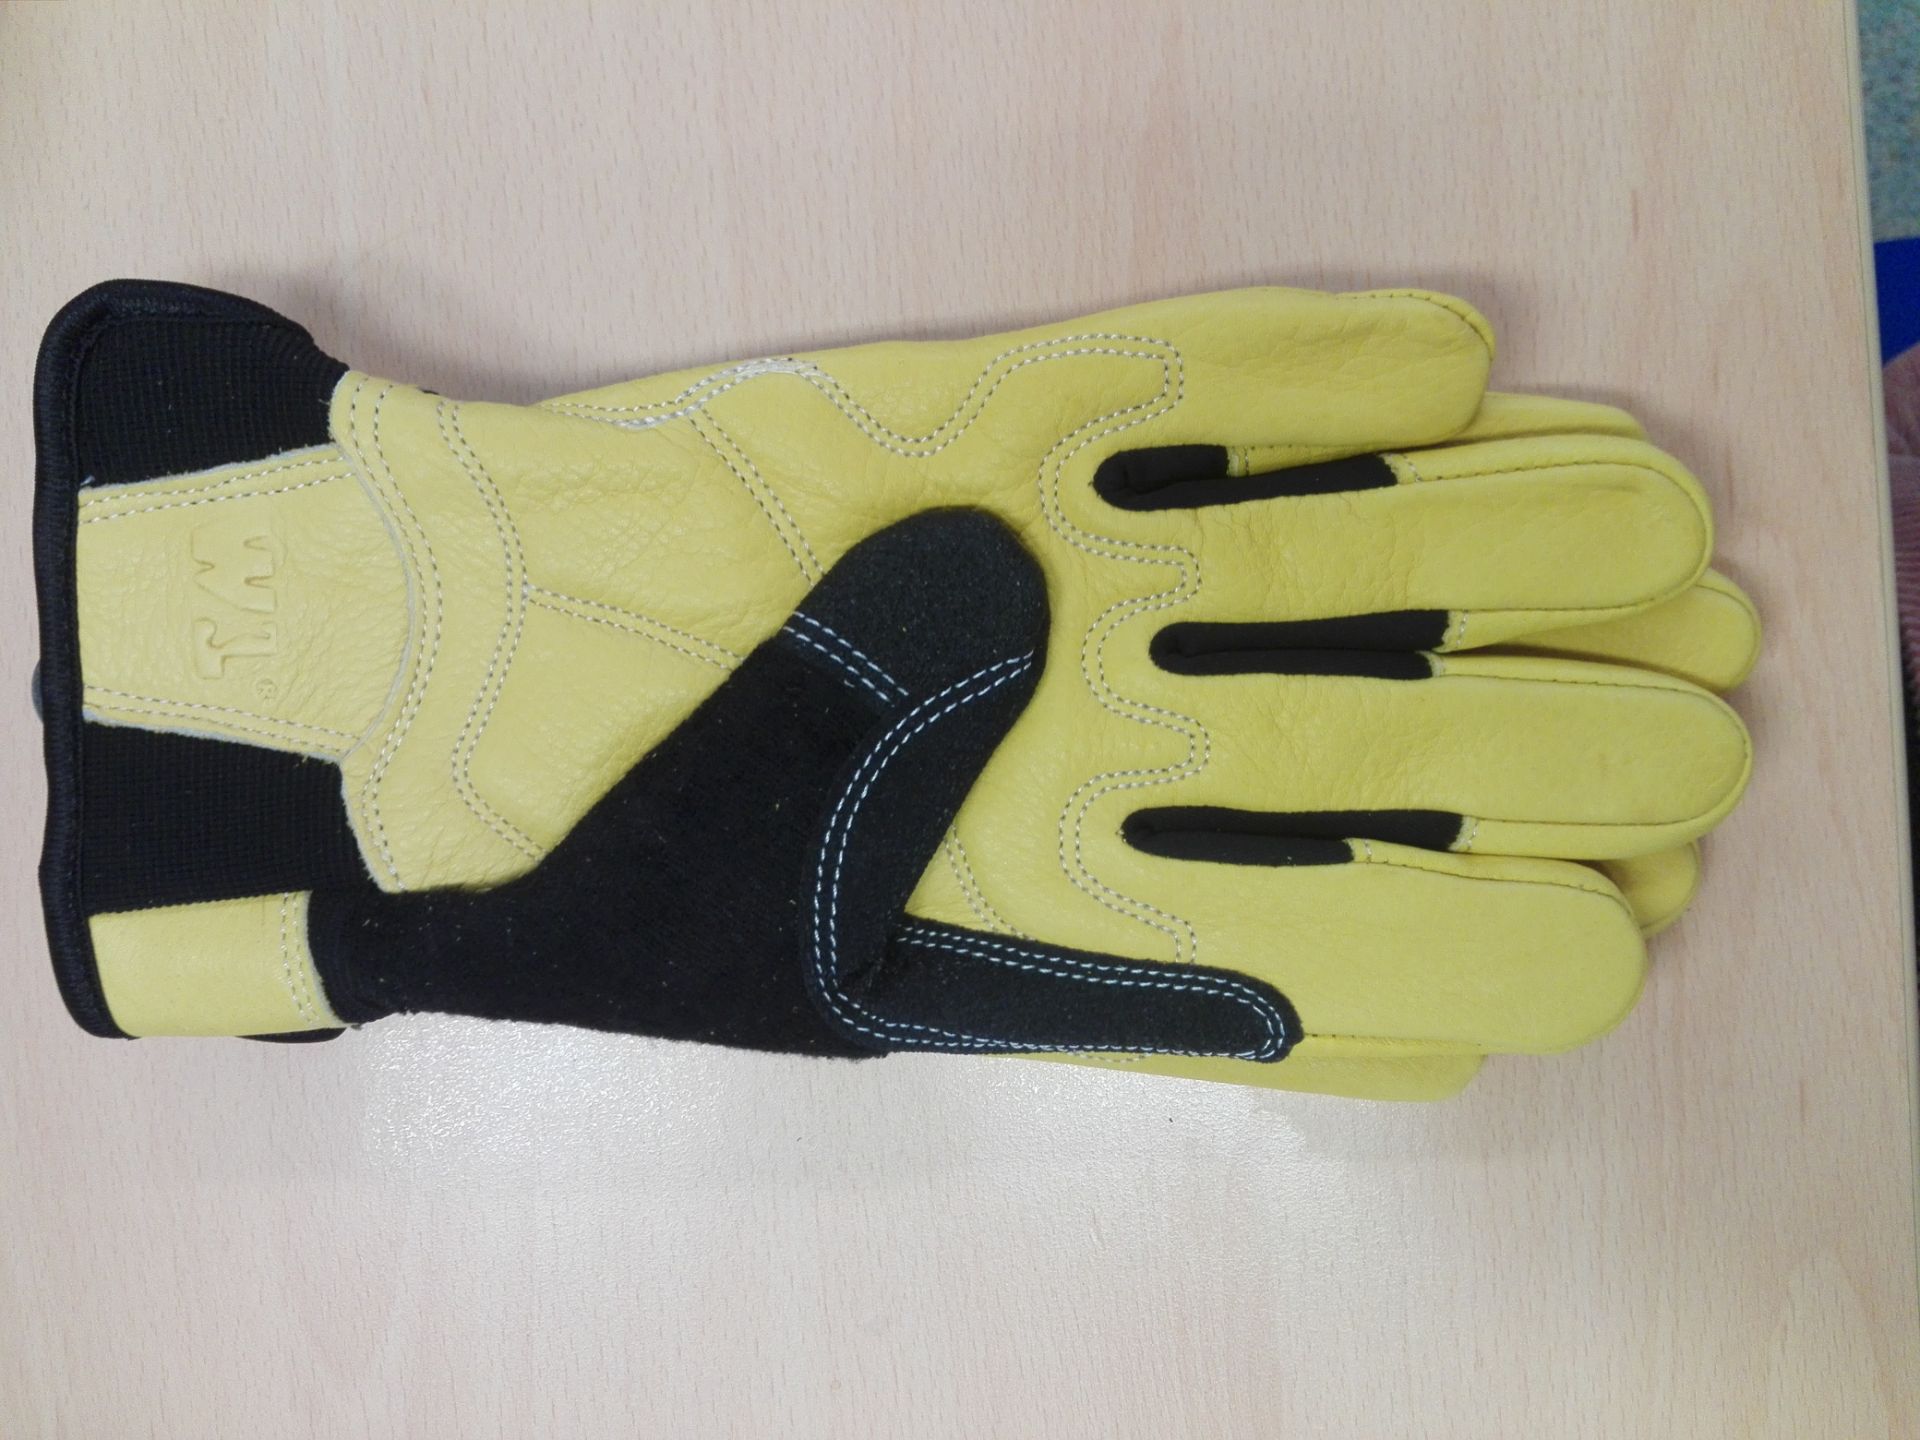 Premium Leather Safety Gloves - Image 2 of 4